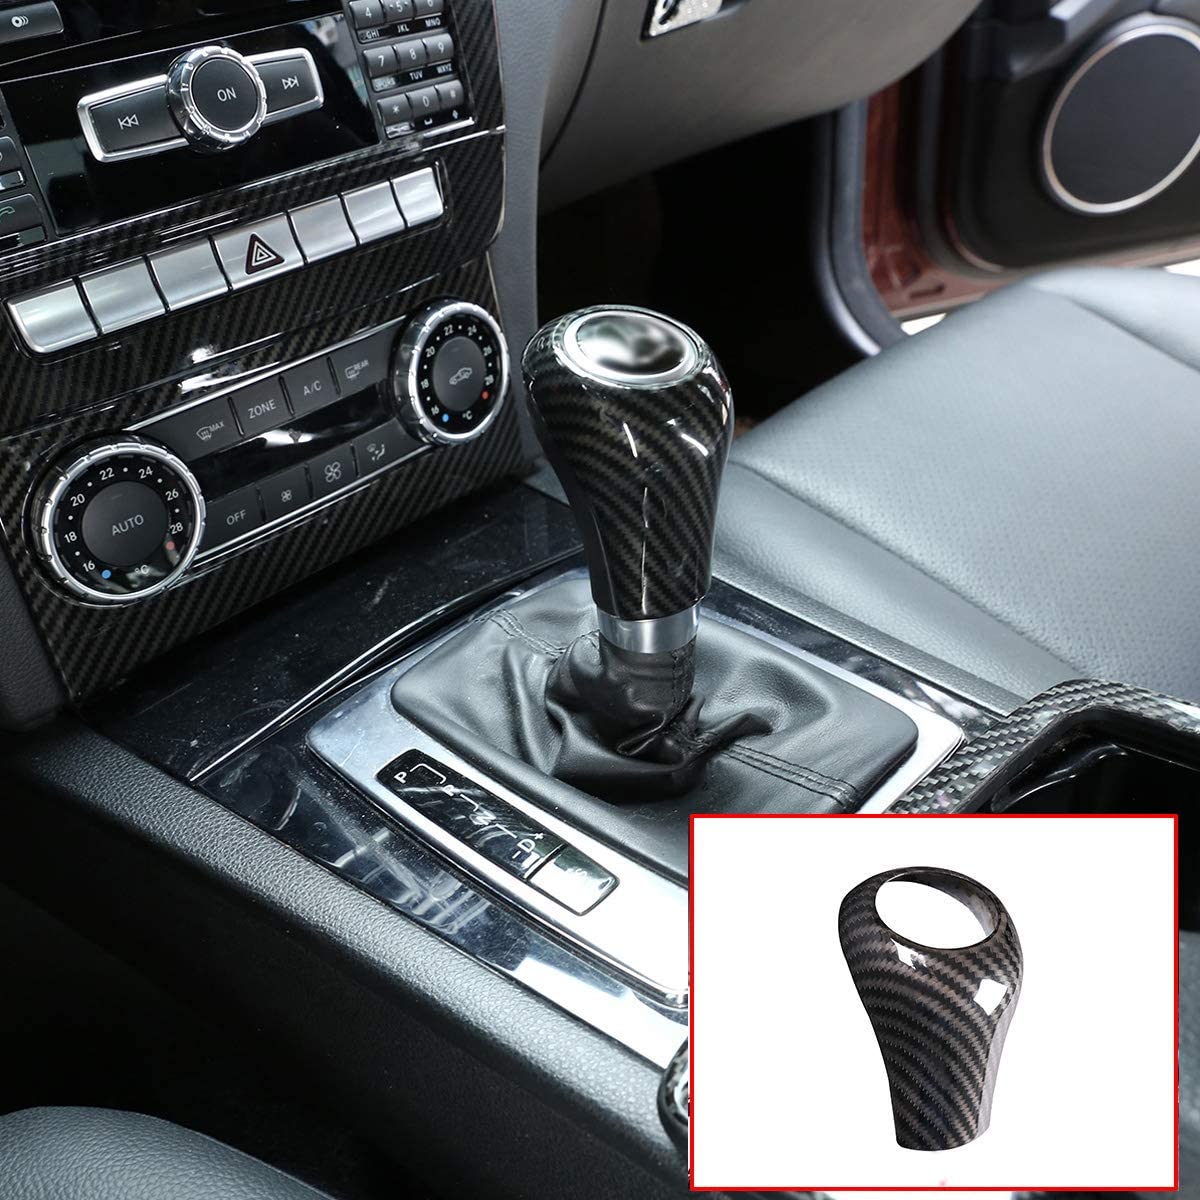 ABS Console Gear Shift Knob Trim Cover For Benz C Class W203 W204 S204 2004-2013 